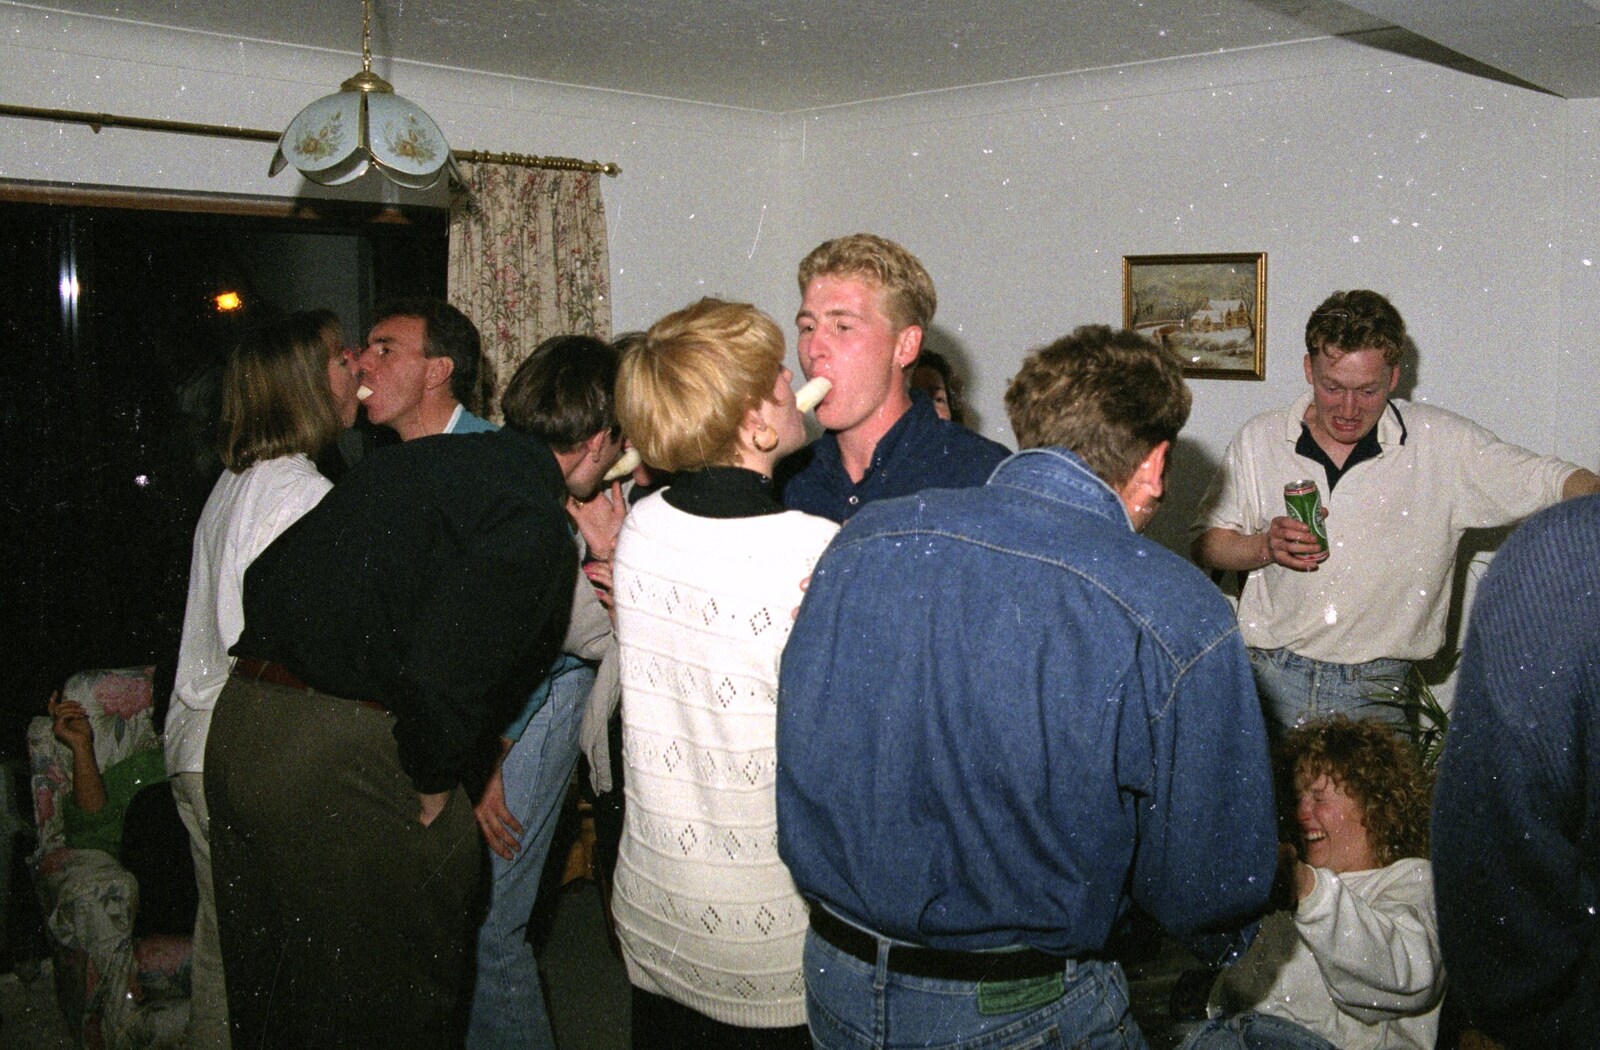 A Party in Clacton and the Stuston Polling Caravan, Suffolk and Essex - 4th May 1991: Bananas ar passed around